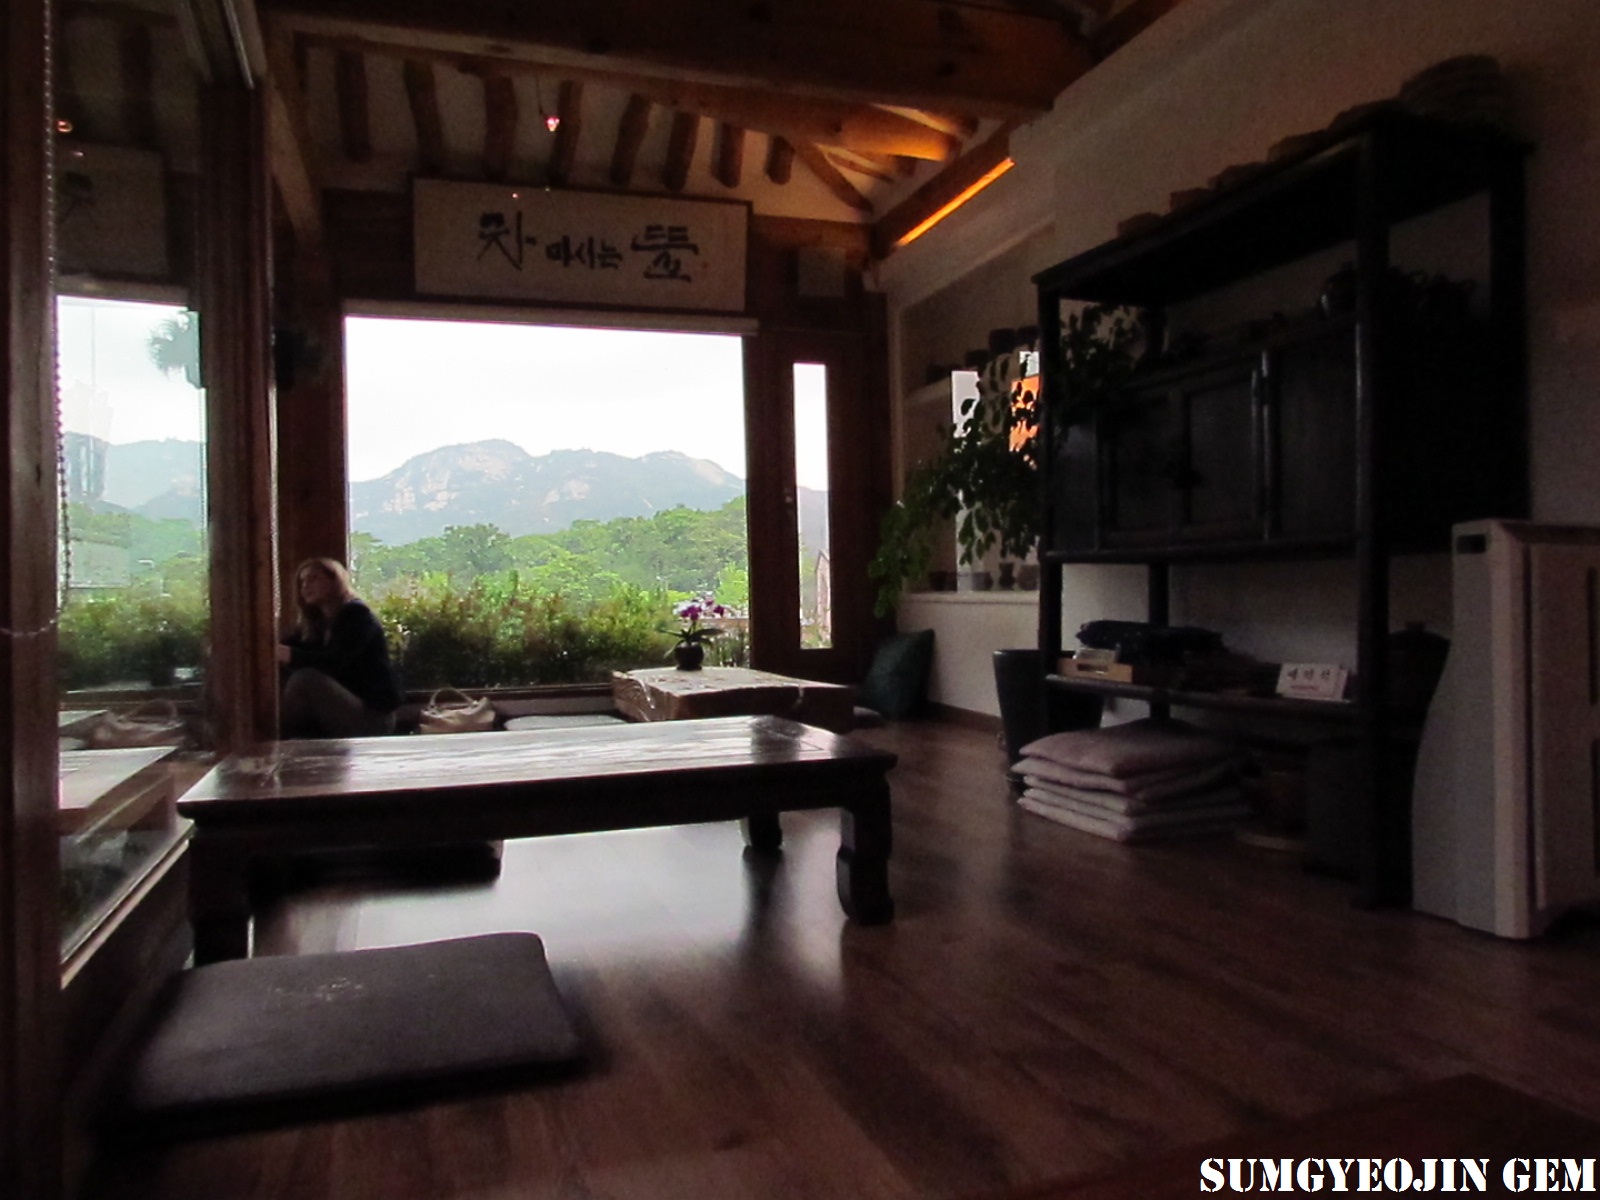  Traditional Teahouses in Bukchon and Insadong Seoul 